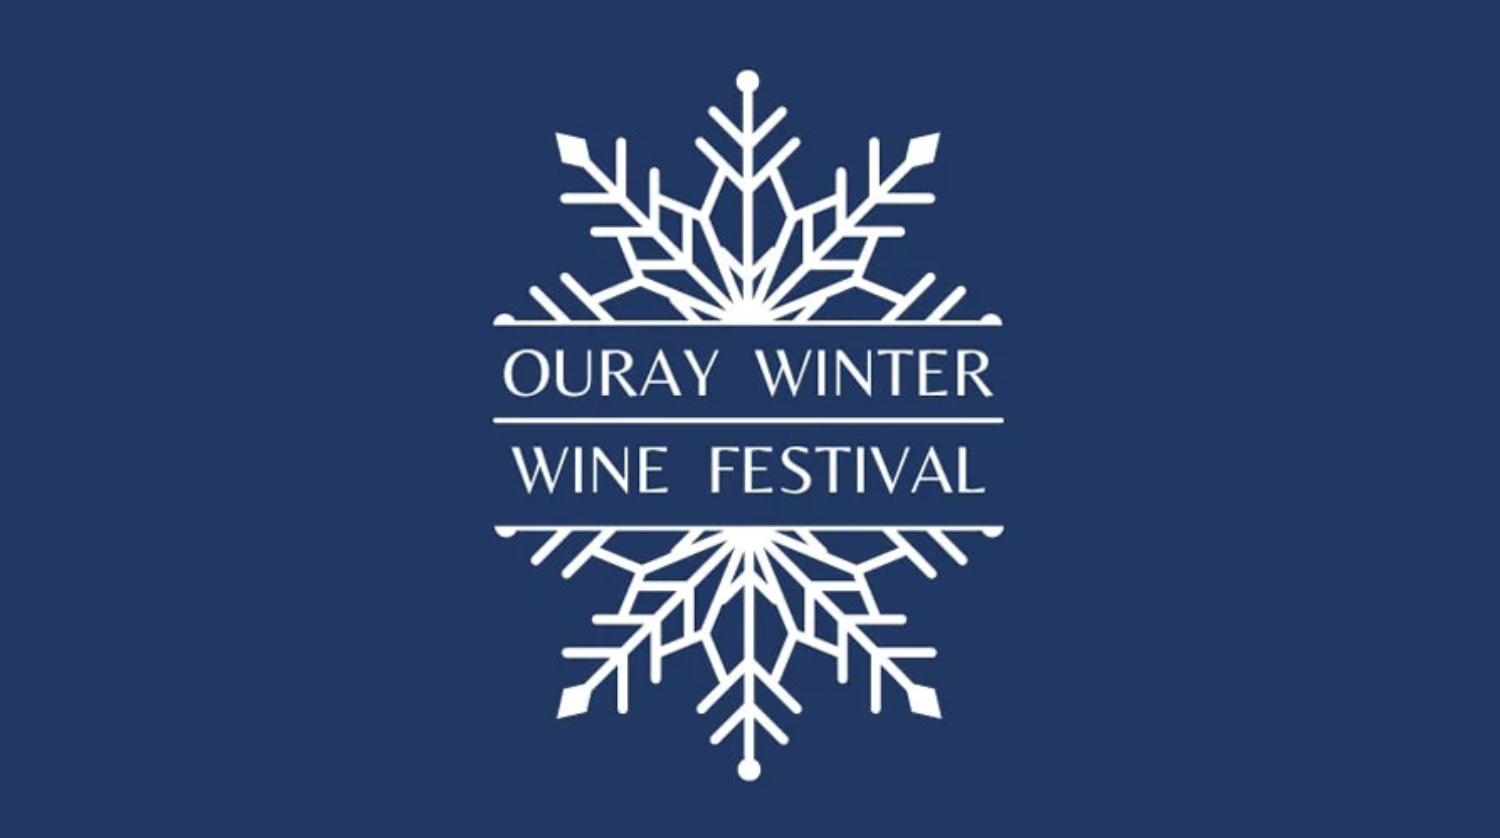 Icicle with the words "Ouray Winter Wine Festival" in the middle